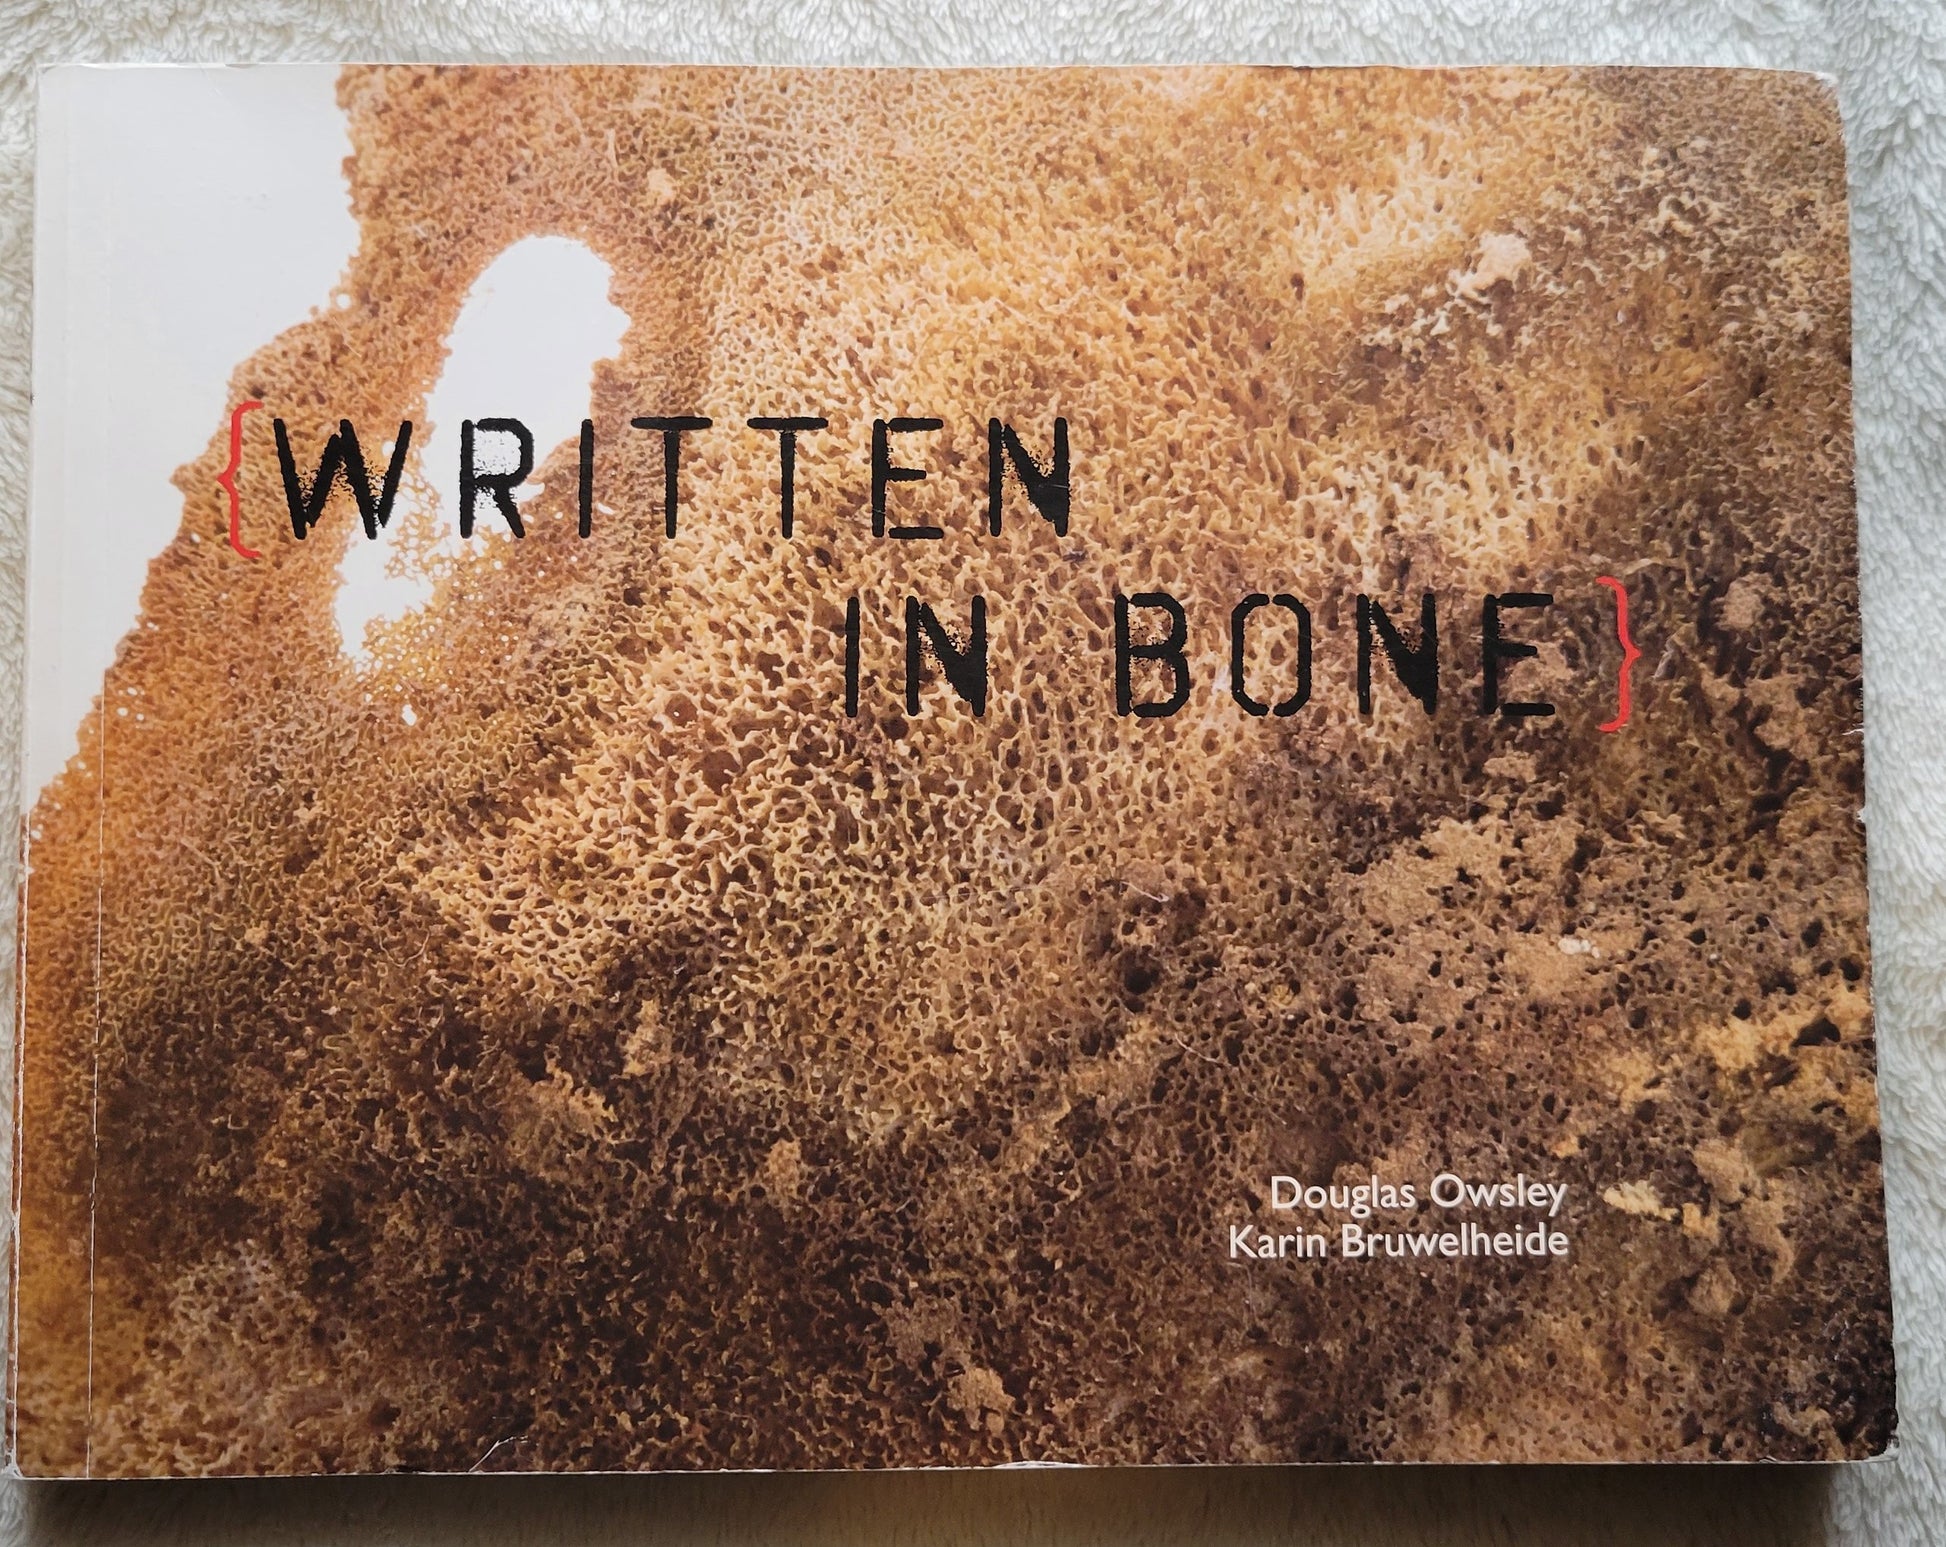 Used book for sale "Written in Bone" by Douglas Owsley and Karin Bruwelheide, published by LeanTo Press, 2009. Front cover.